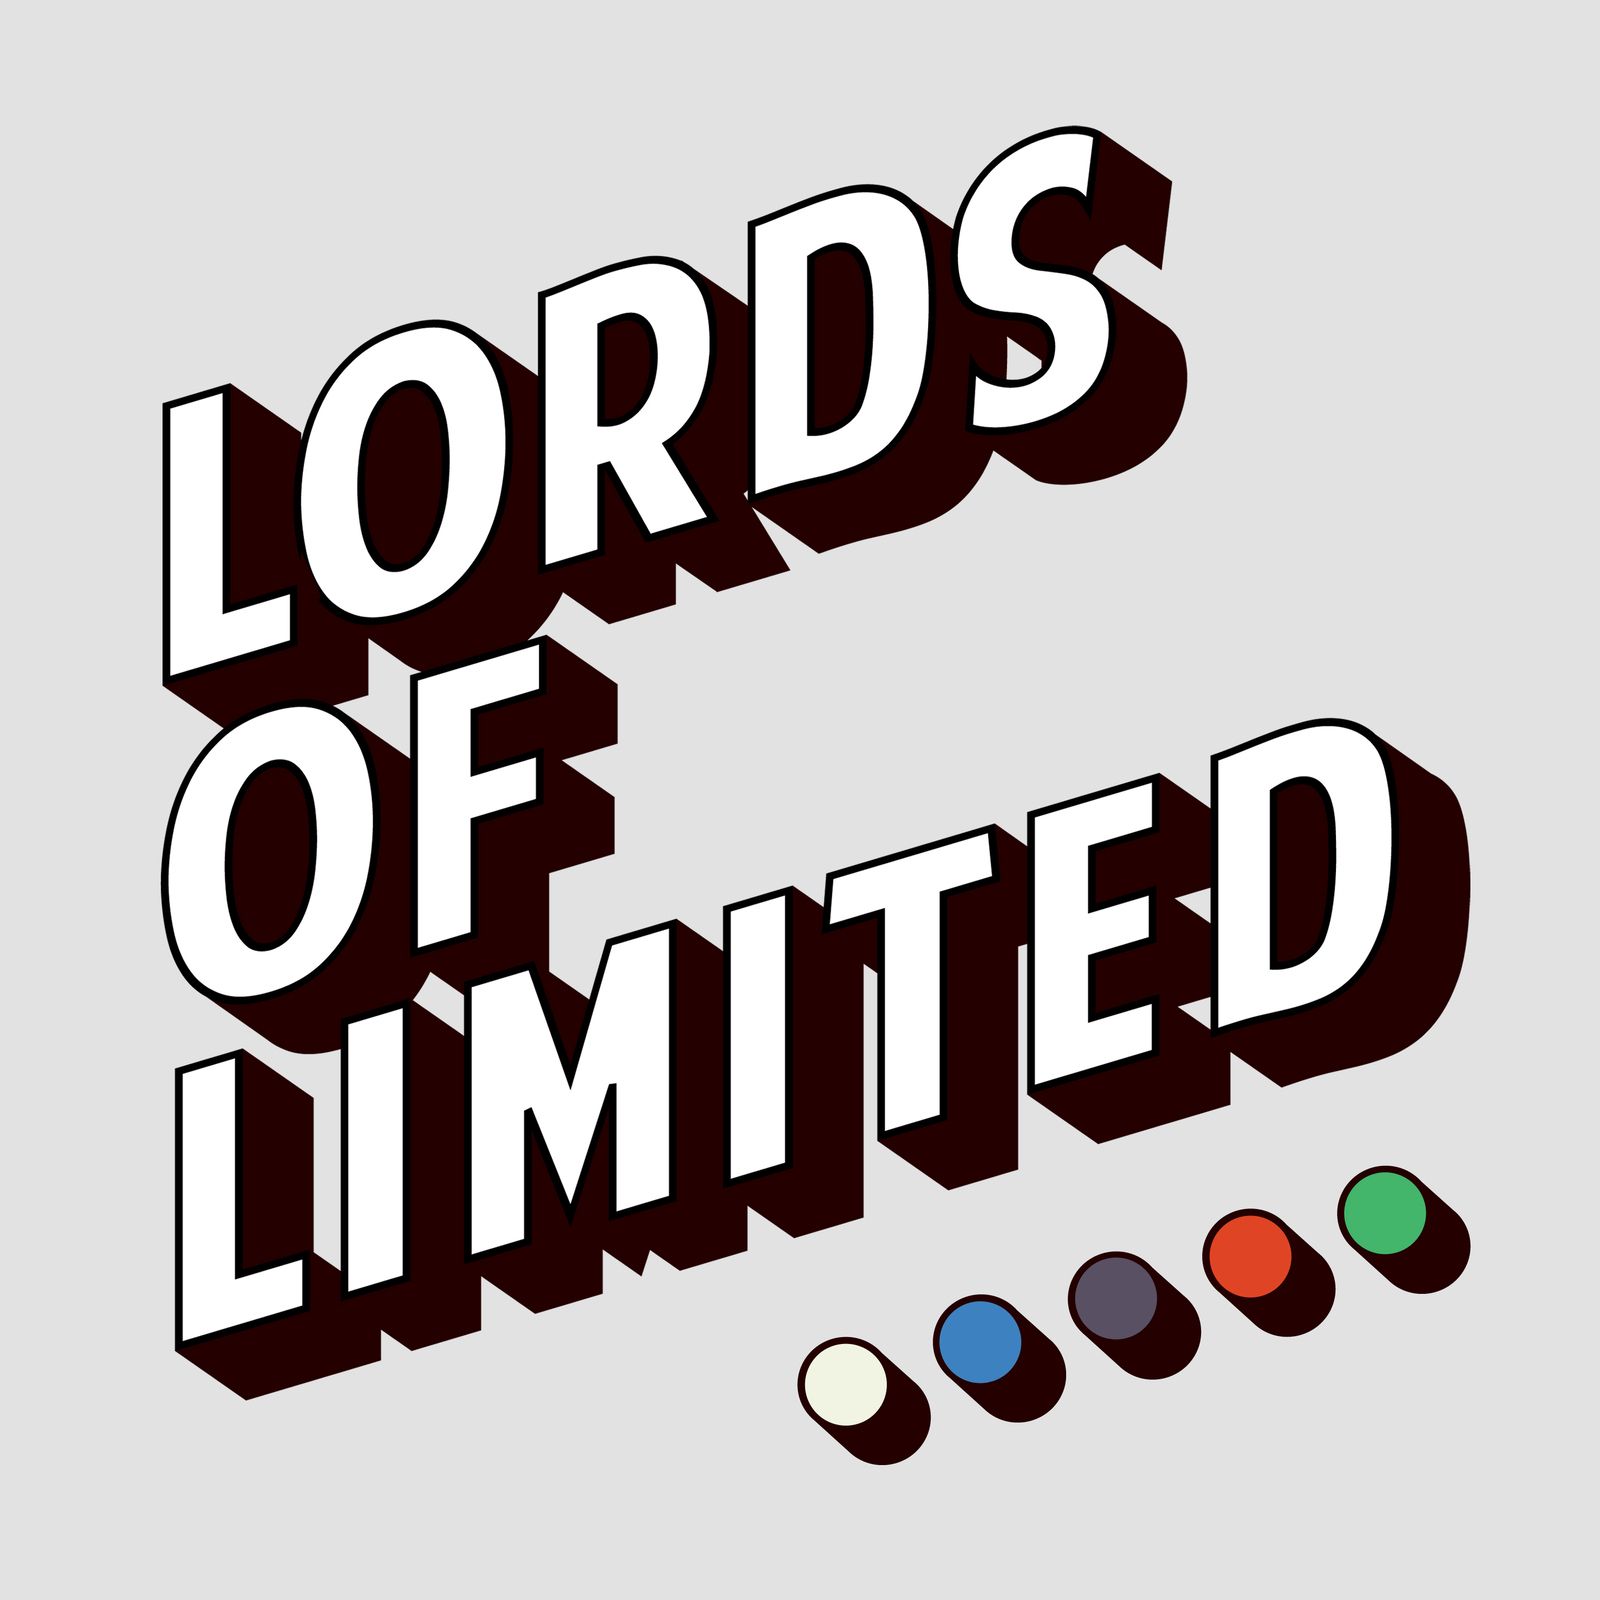 103: Lords of Limited 103 - The Definitive MH1 Sealed Guide